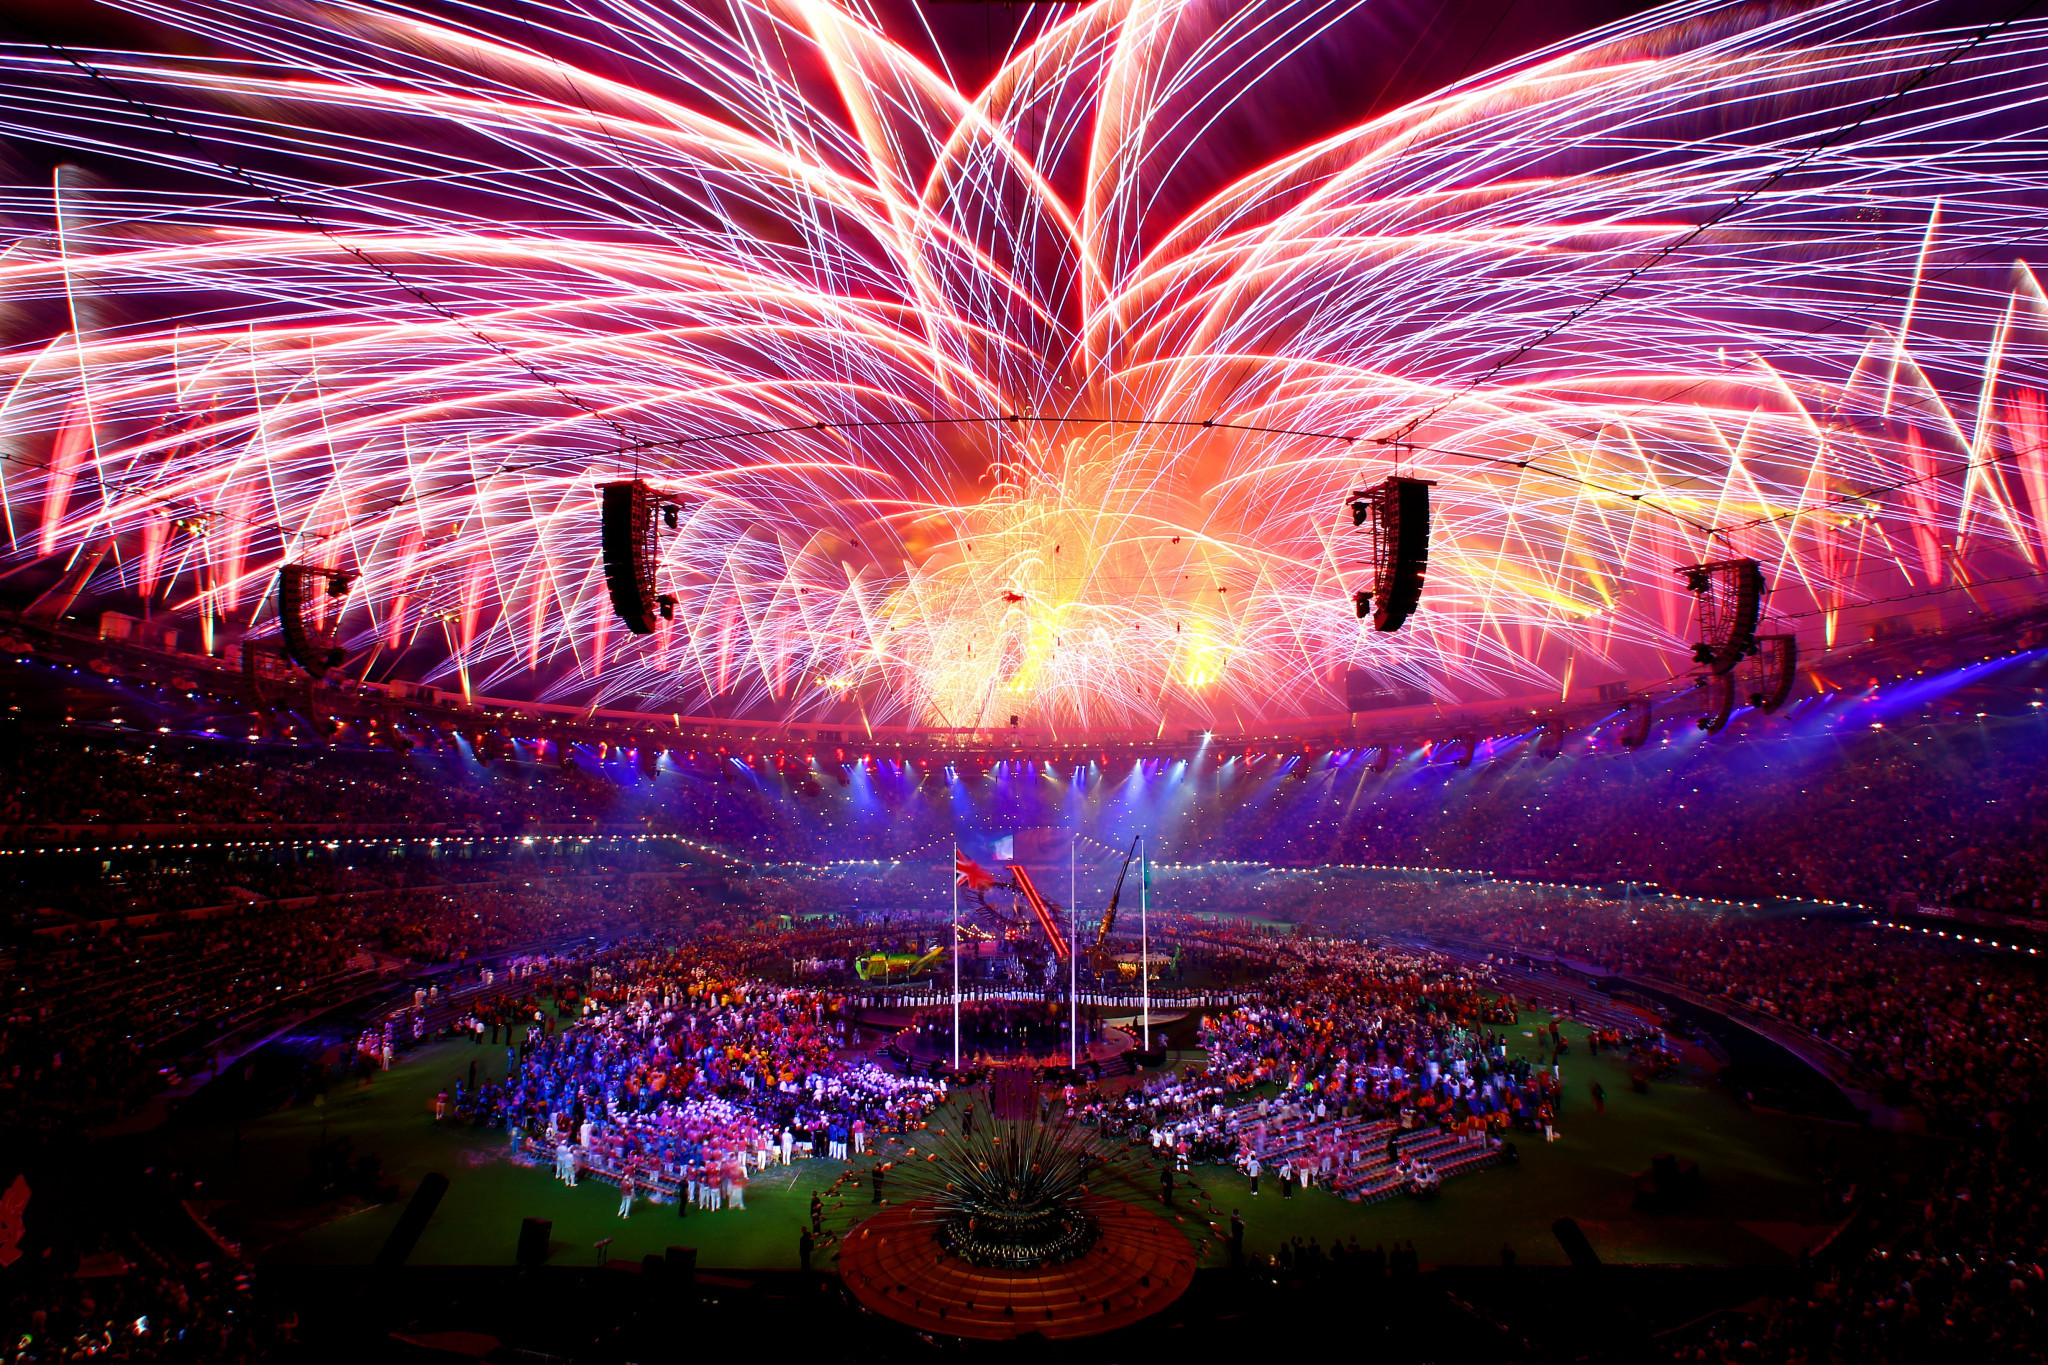 Fireworks light up the stadium during the closing ceremony on day 11 of the London 2012 Paralympic Games at Olympic Stadium on September 9, 2012 in London, England ©Getty Images